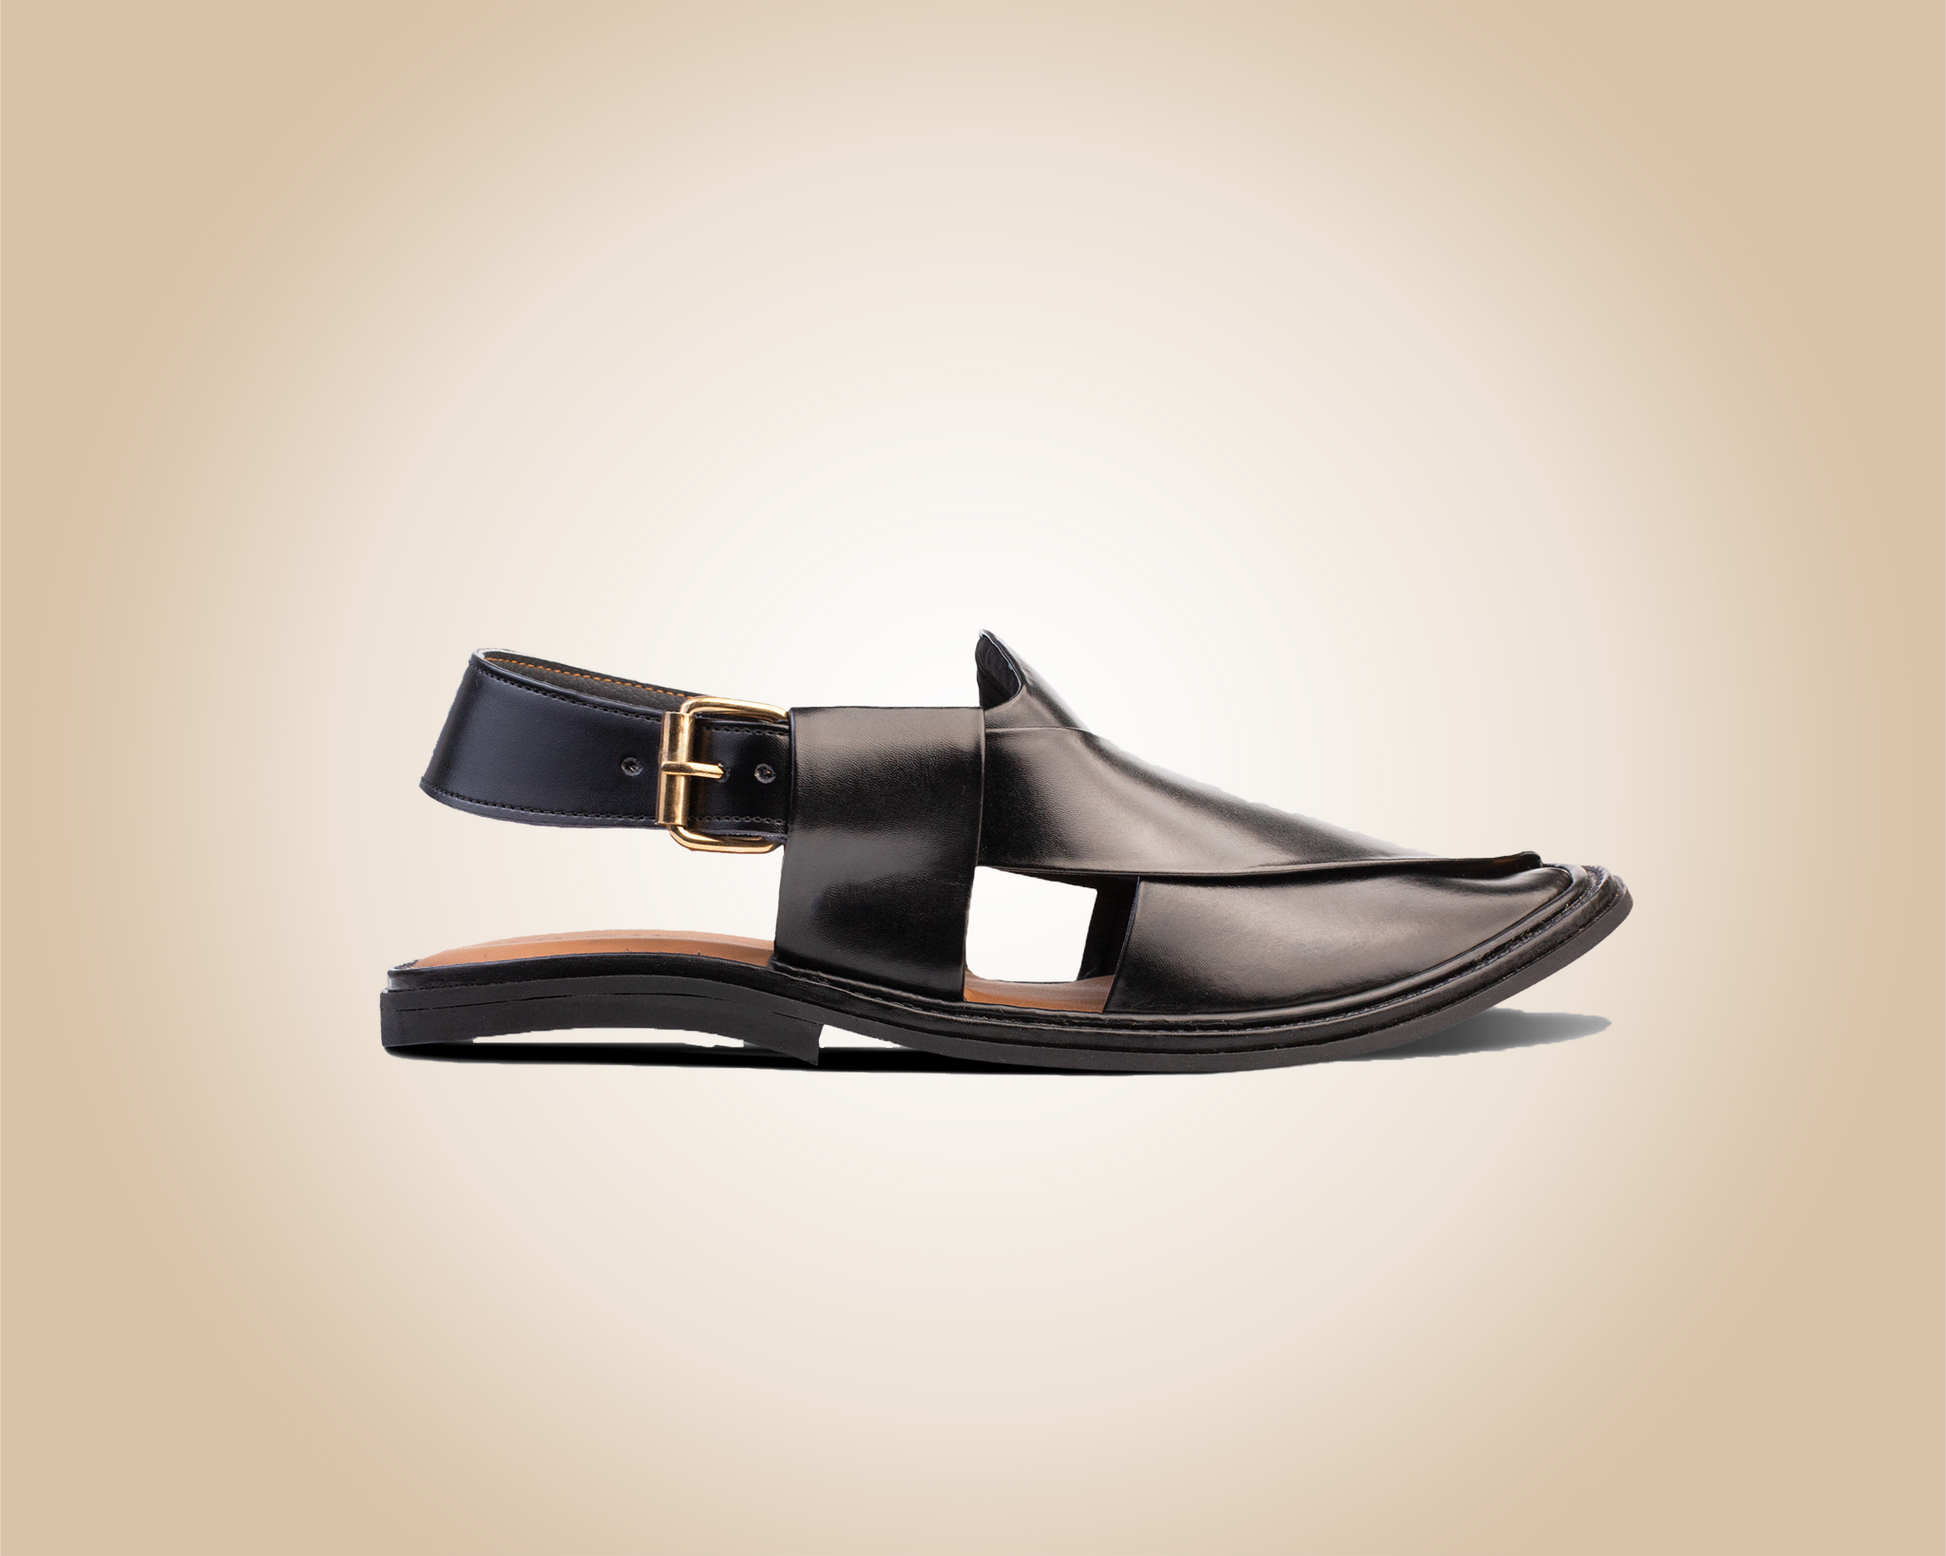 "Round Shape Jet Black Saply sandals, known as Peshawari Chappal, featuring traditional leather craftsmanship."